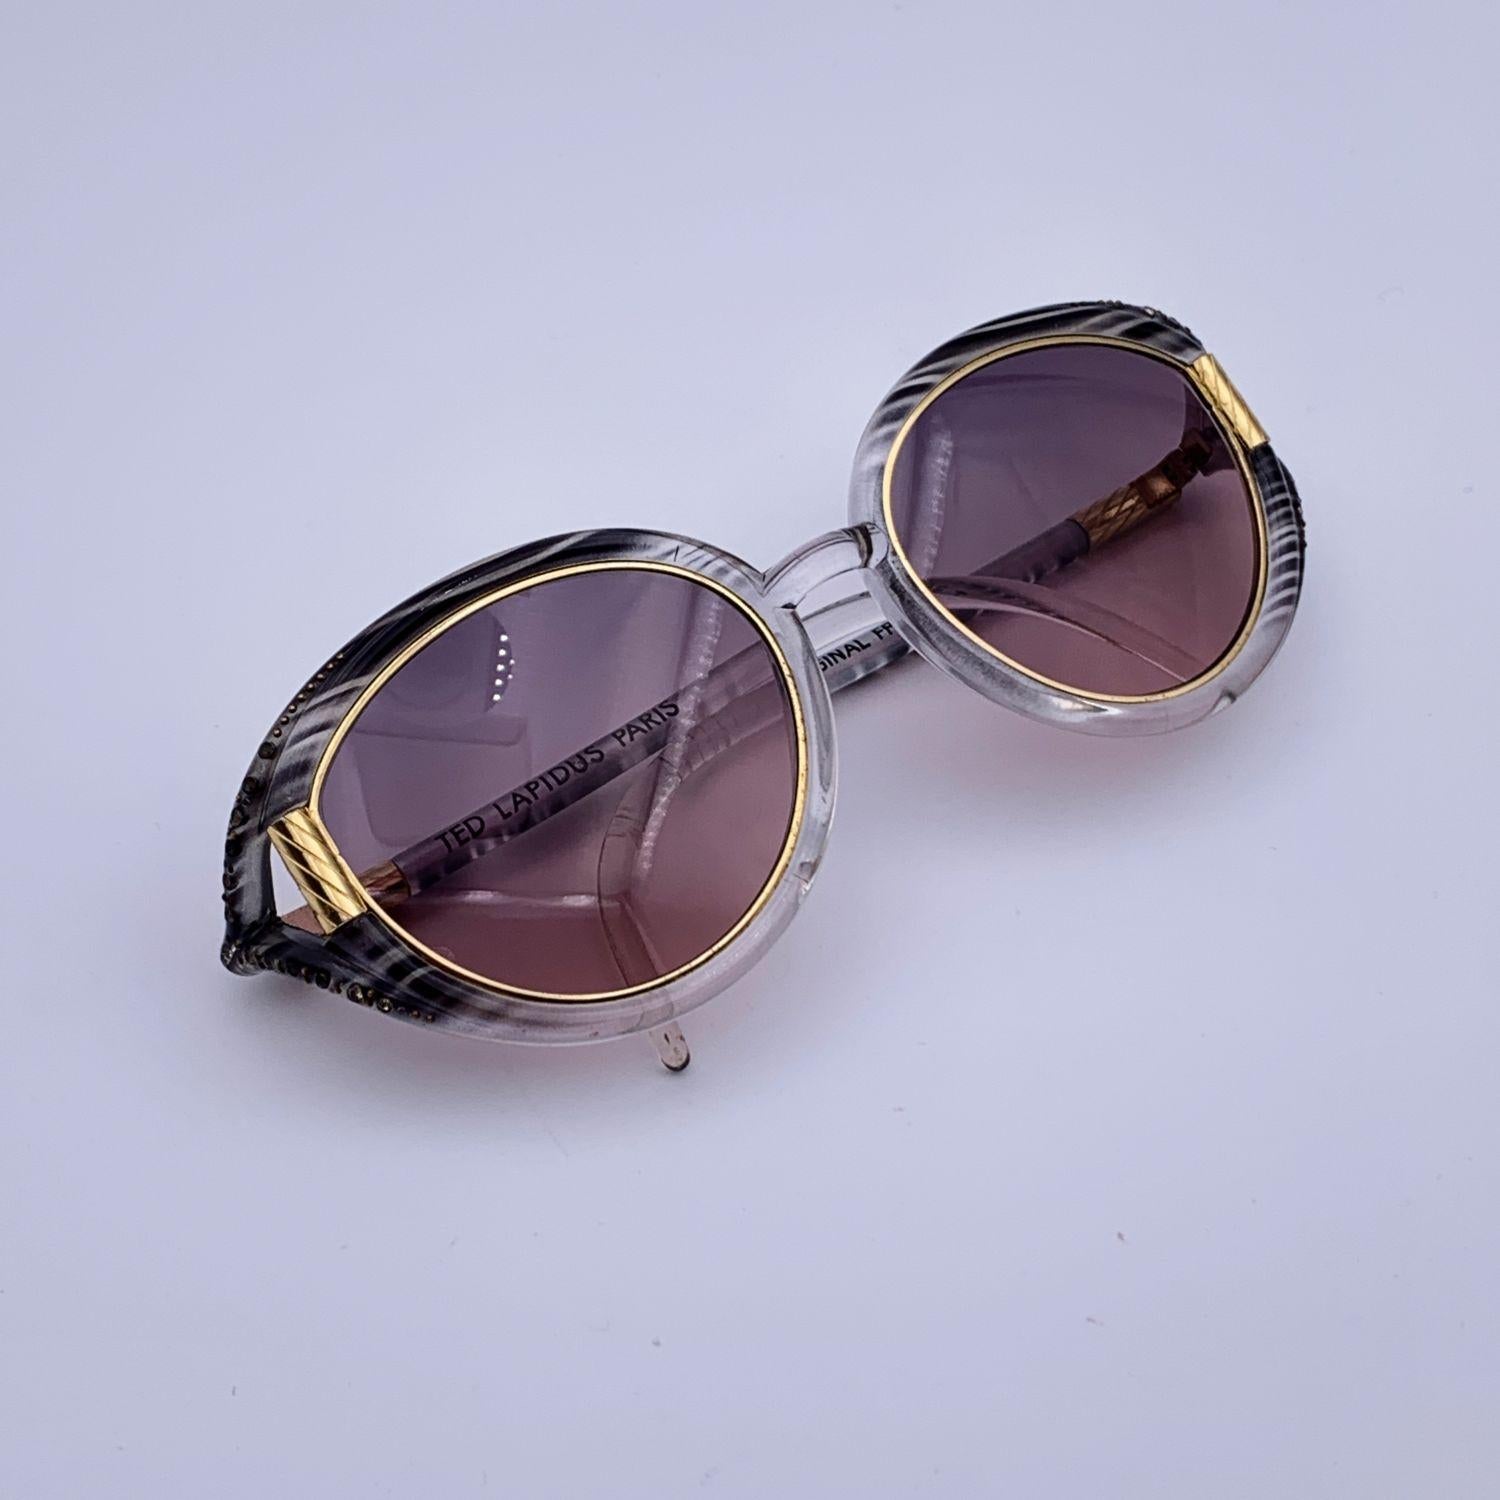 Vintage oval B10 sunglasses from the 70s by TED LAPIDUS. Grey striped and clear frame accented with gold metal elements. Gradient light grey and pink lenses (100% UV protection). Made in France

Details

MATERIAL: Plastic

COLOR: Grey

MODEL: